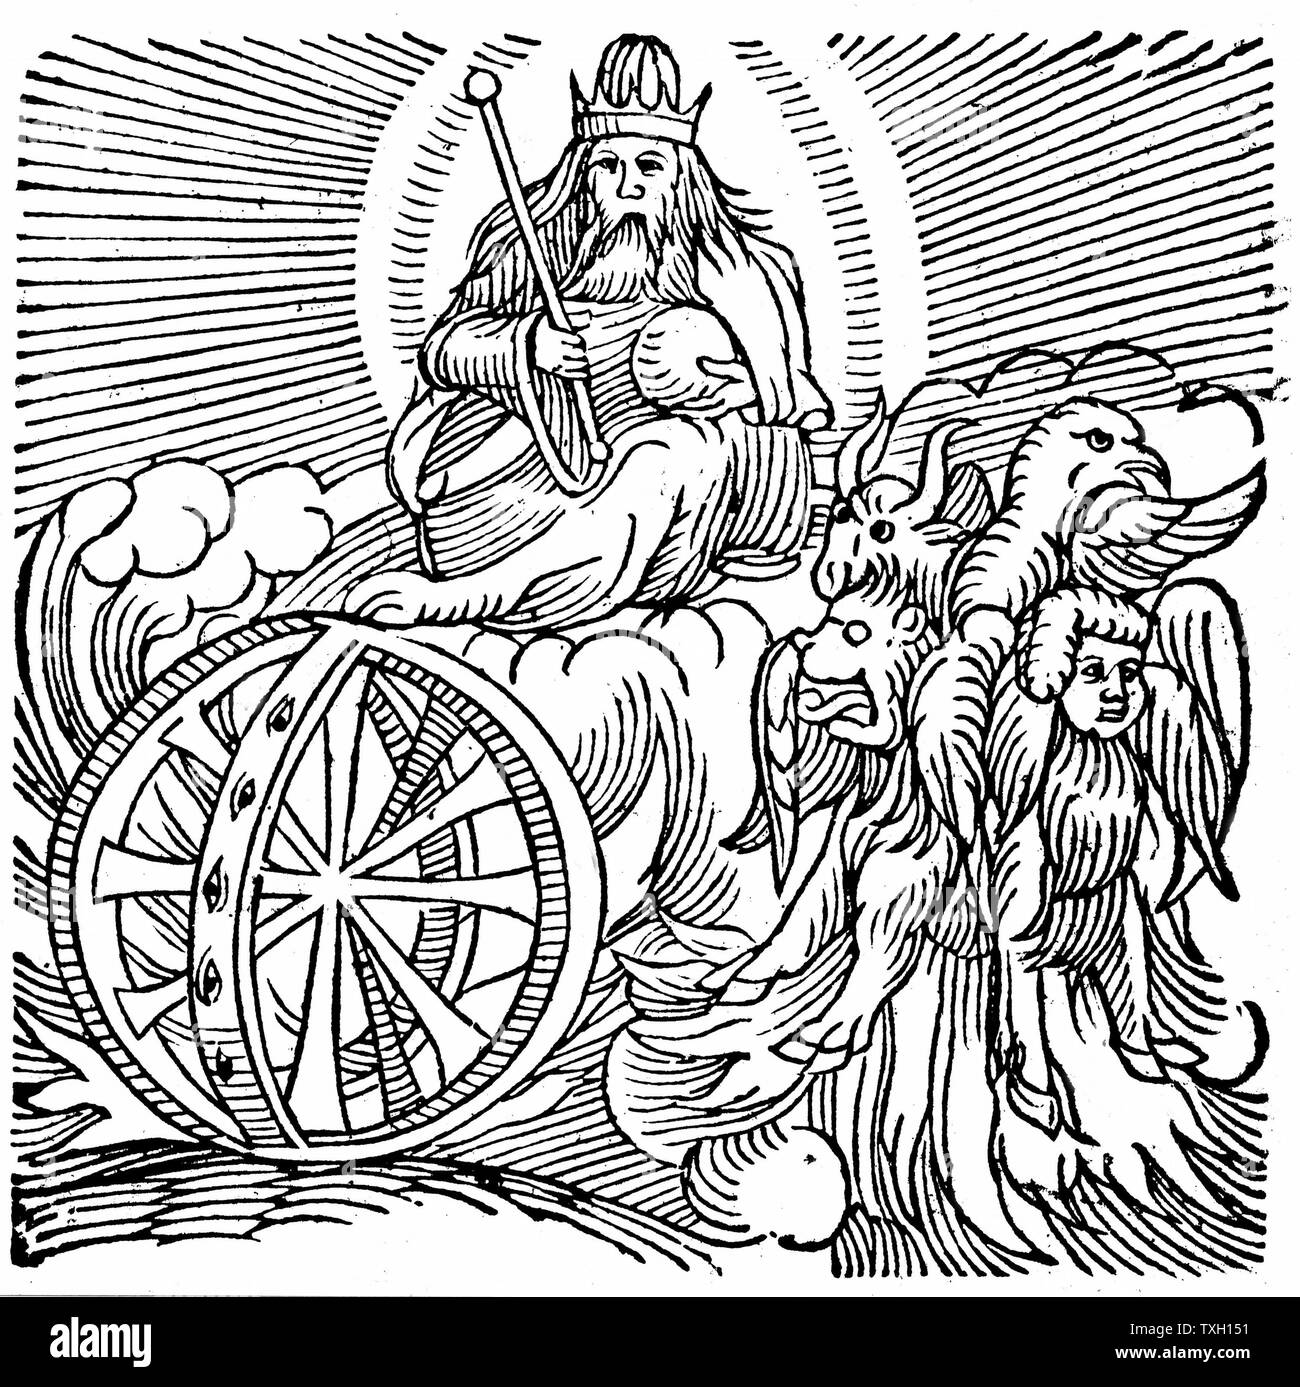 Ezekiel's vision of chariot in sky c.614 BC. 'Bible' Ezekiel II:9. One modern explanation is that Ezekiel, on of four great Hebrew prophets, observed parhelia (mock suns), a phenomenon caused by reflection from water droplets or minute particles in the earth's atmosphere. From Conrad Lycosthenes 'Prodigiorum ac ostentorum chronicon', Basel, 1557. Woodcut Stock Photo